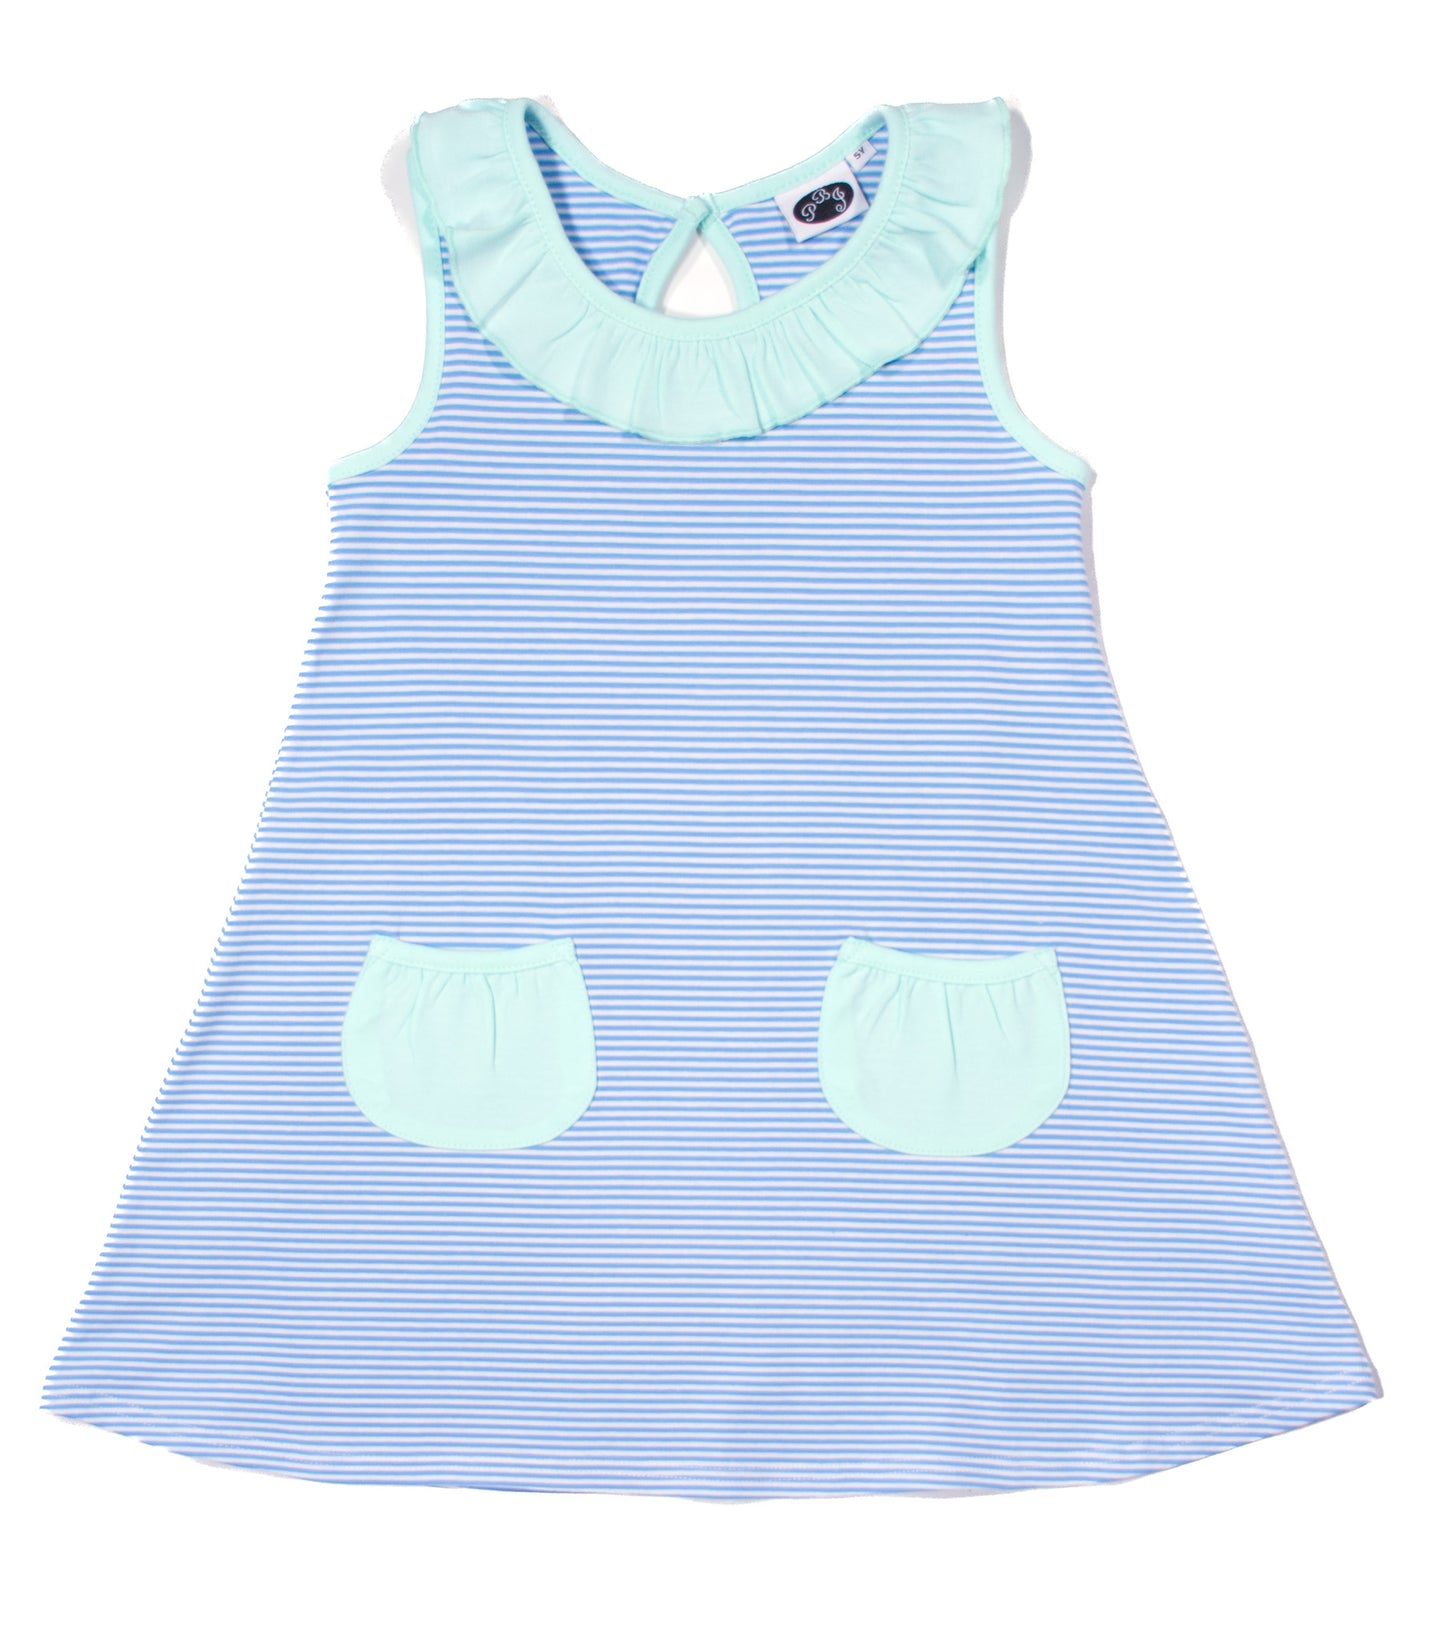 Swing Dress with pockets cobalt stripes w/ solid mint - PREORDER